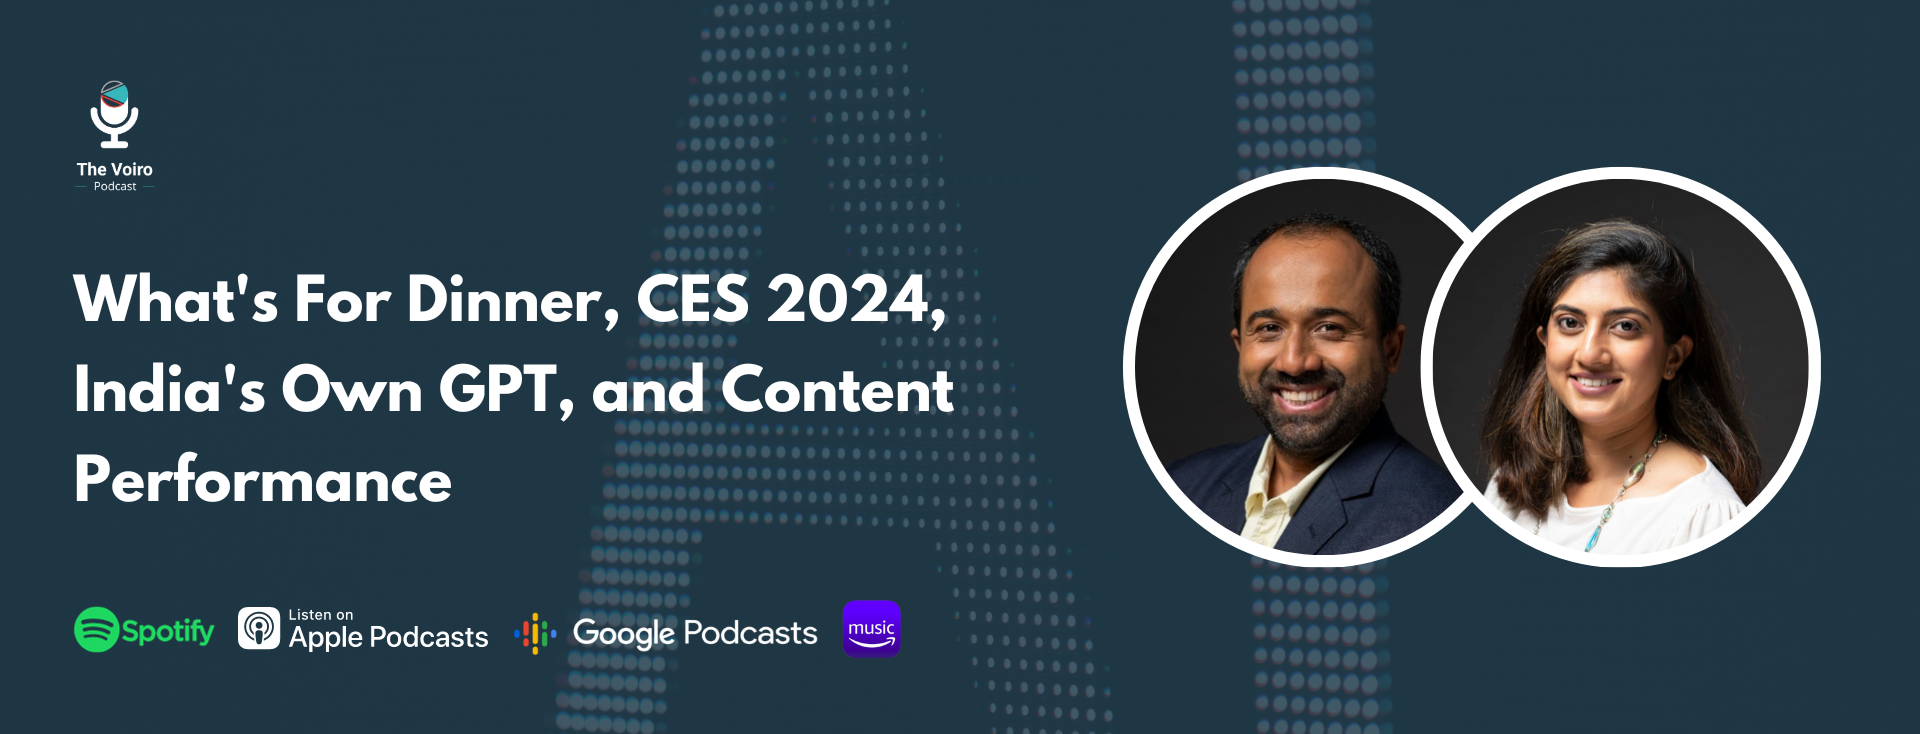 What's For Dinner, CES 2024, India's Own GPT, and Content Performance